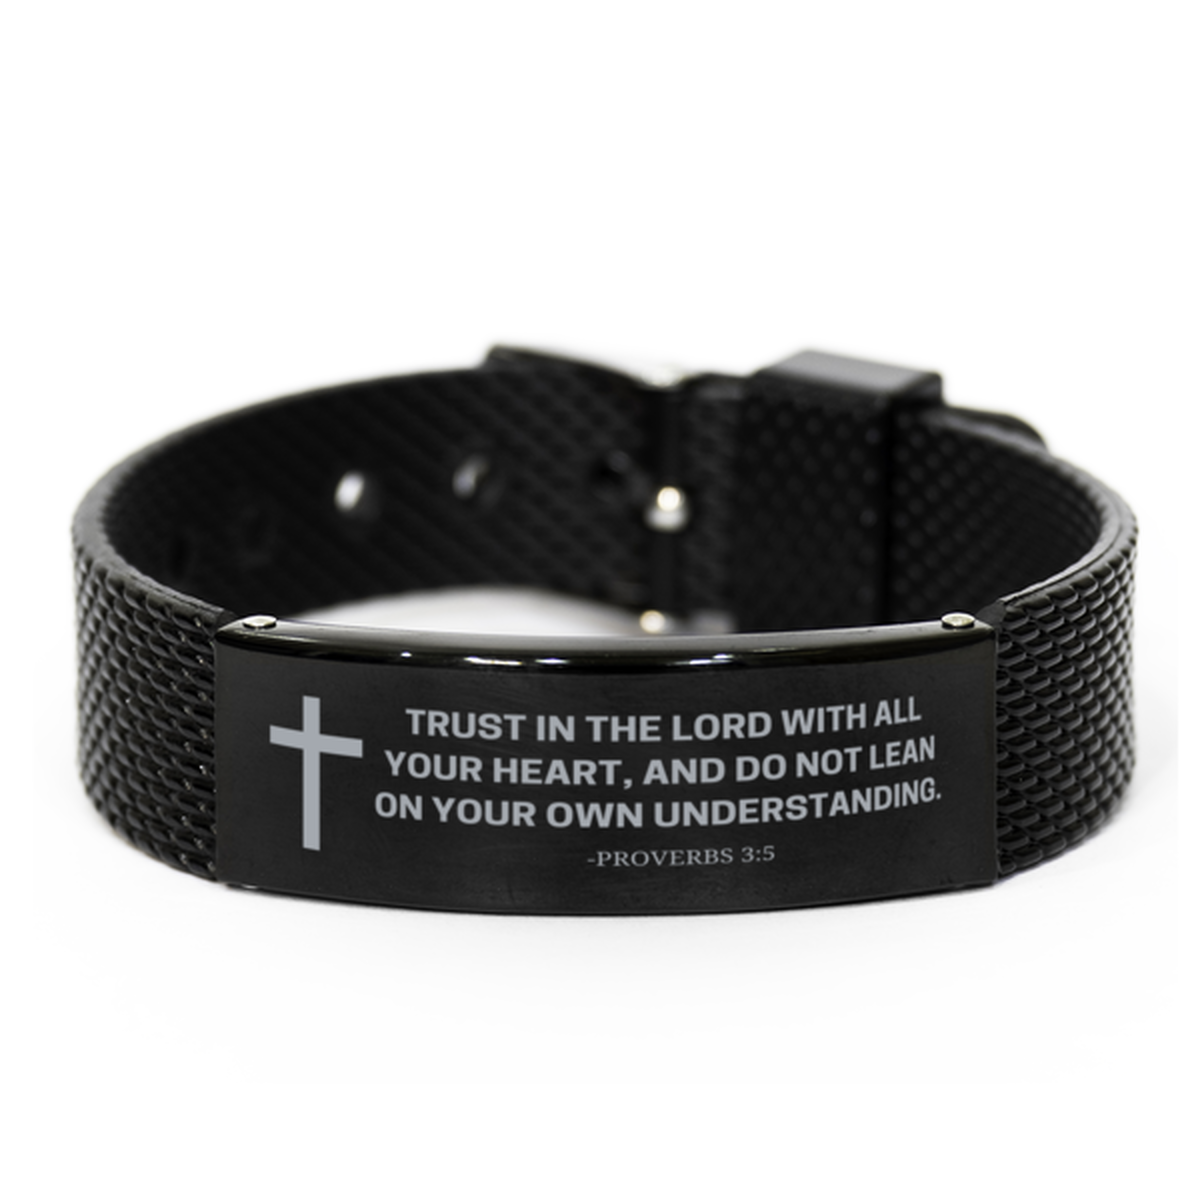 Baptism Gifts For Teenage Boys Girls, Christian Bible Verse Black Shark Mesh Bracelet, Trust in the Lord with all your heart, Catholic Confirmation Gifts for Son, Godson, Grandson, Nephew